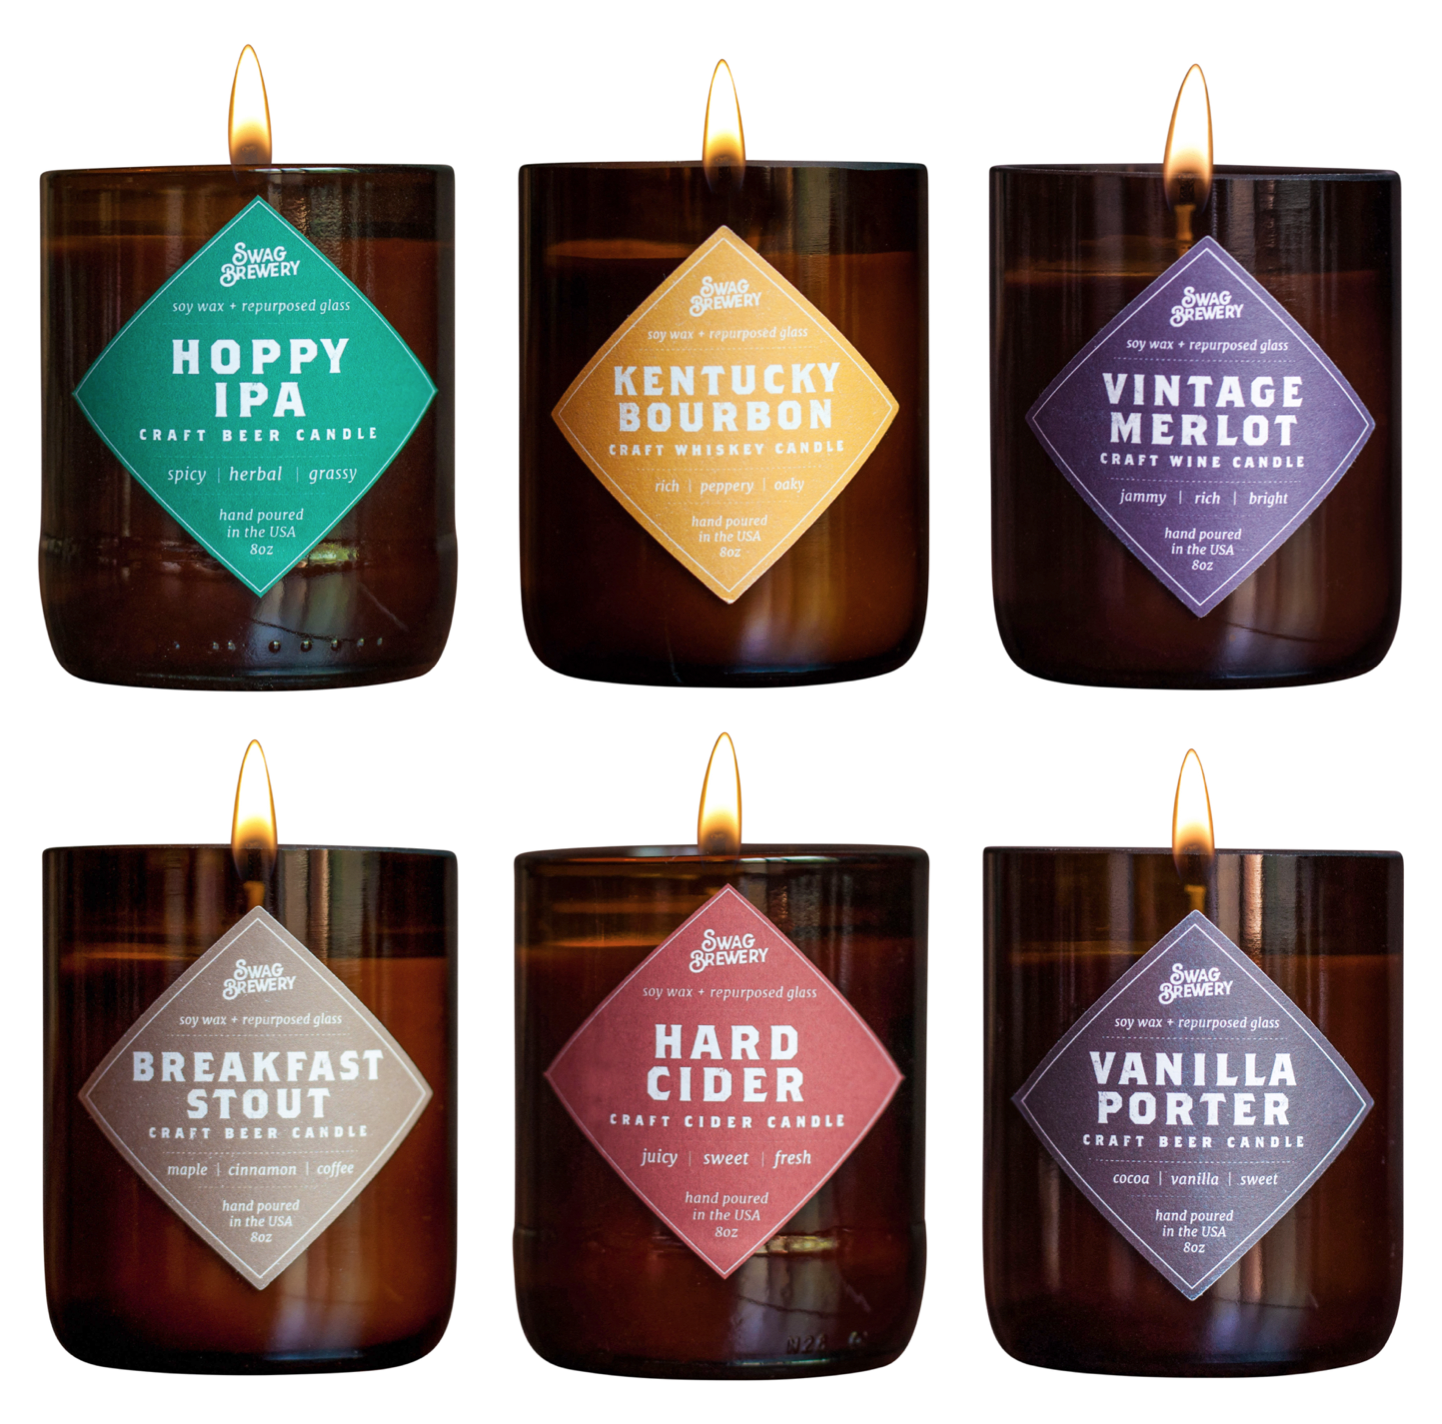 Brew Candles